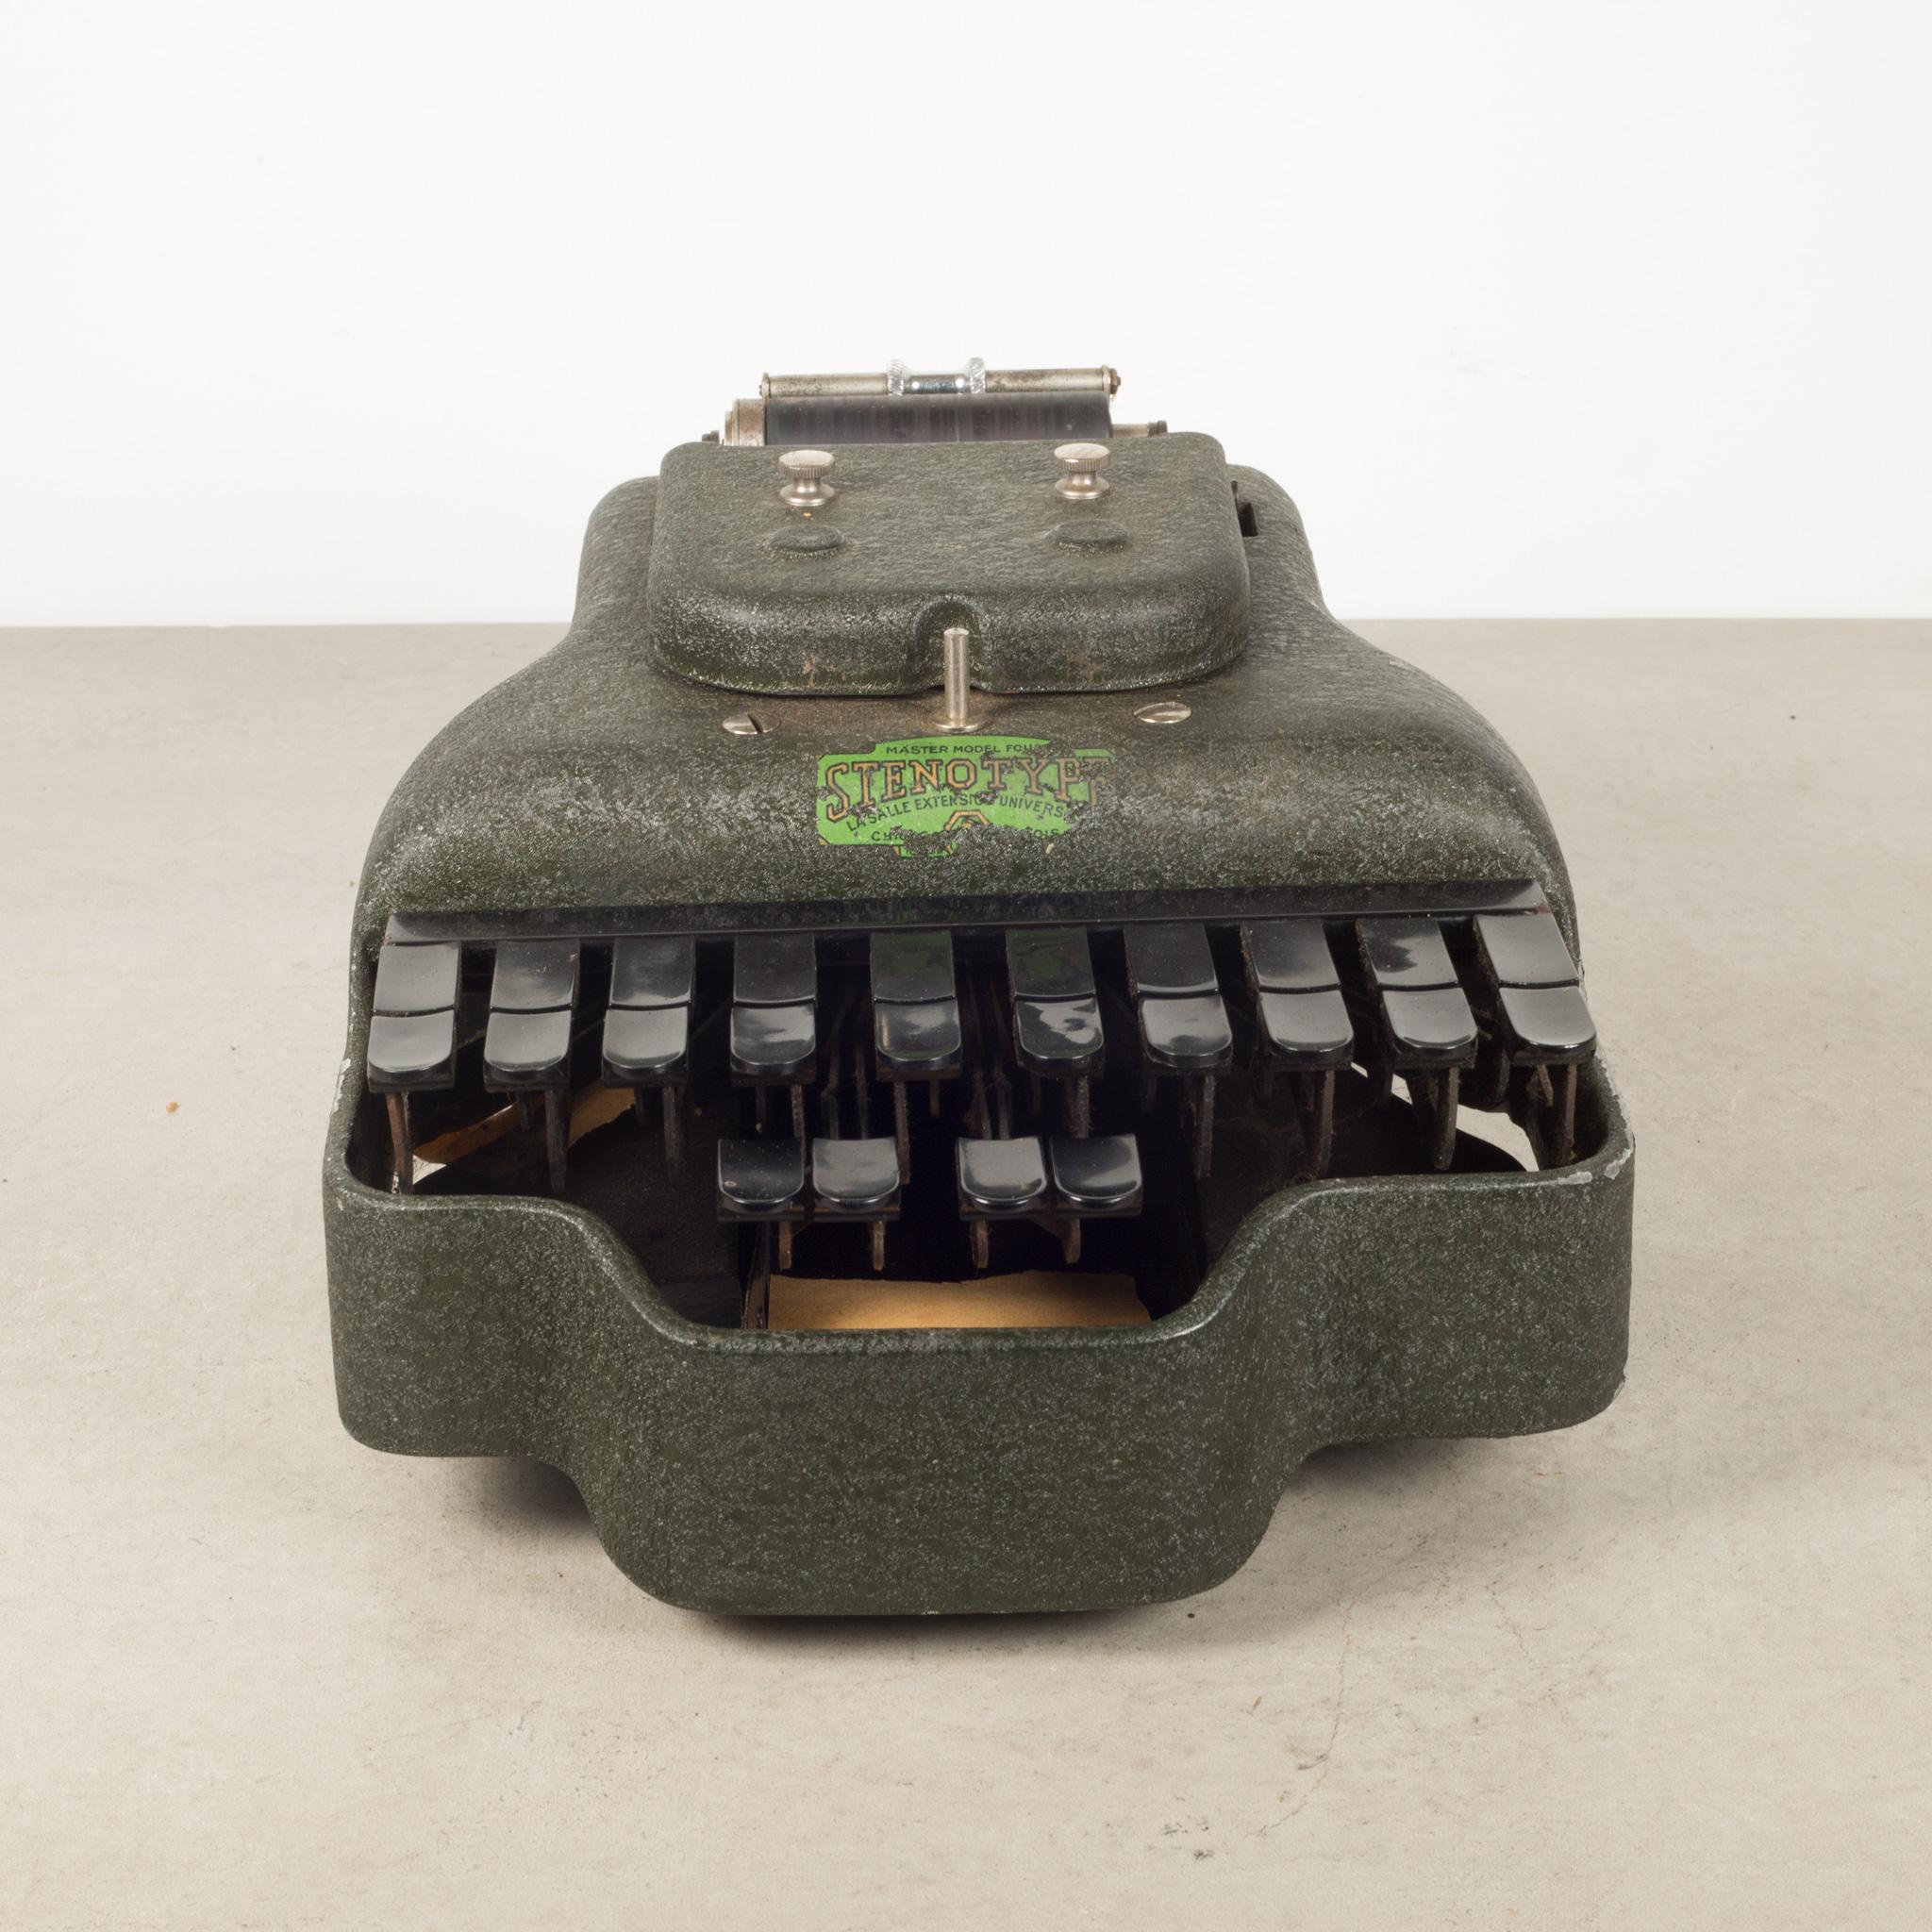 About:

This is an original Stenotype stenograph with Bakelite keys and original case and manual. All the keys work properly but doesn't seem to imprint on the paper.

Creator: Stenotype, Chicago, IL.
Date of manufacture: circa 1933.
Materials and